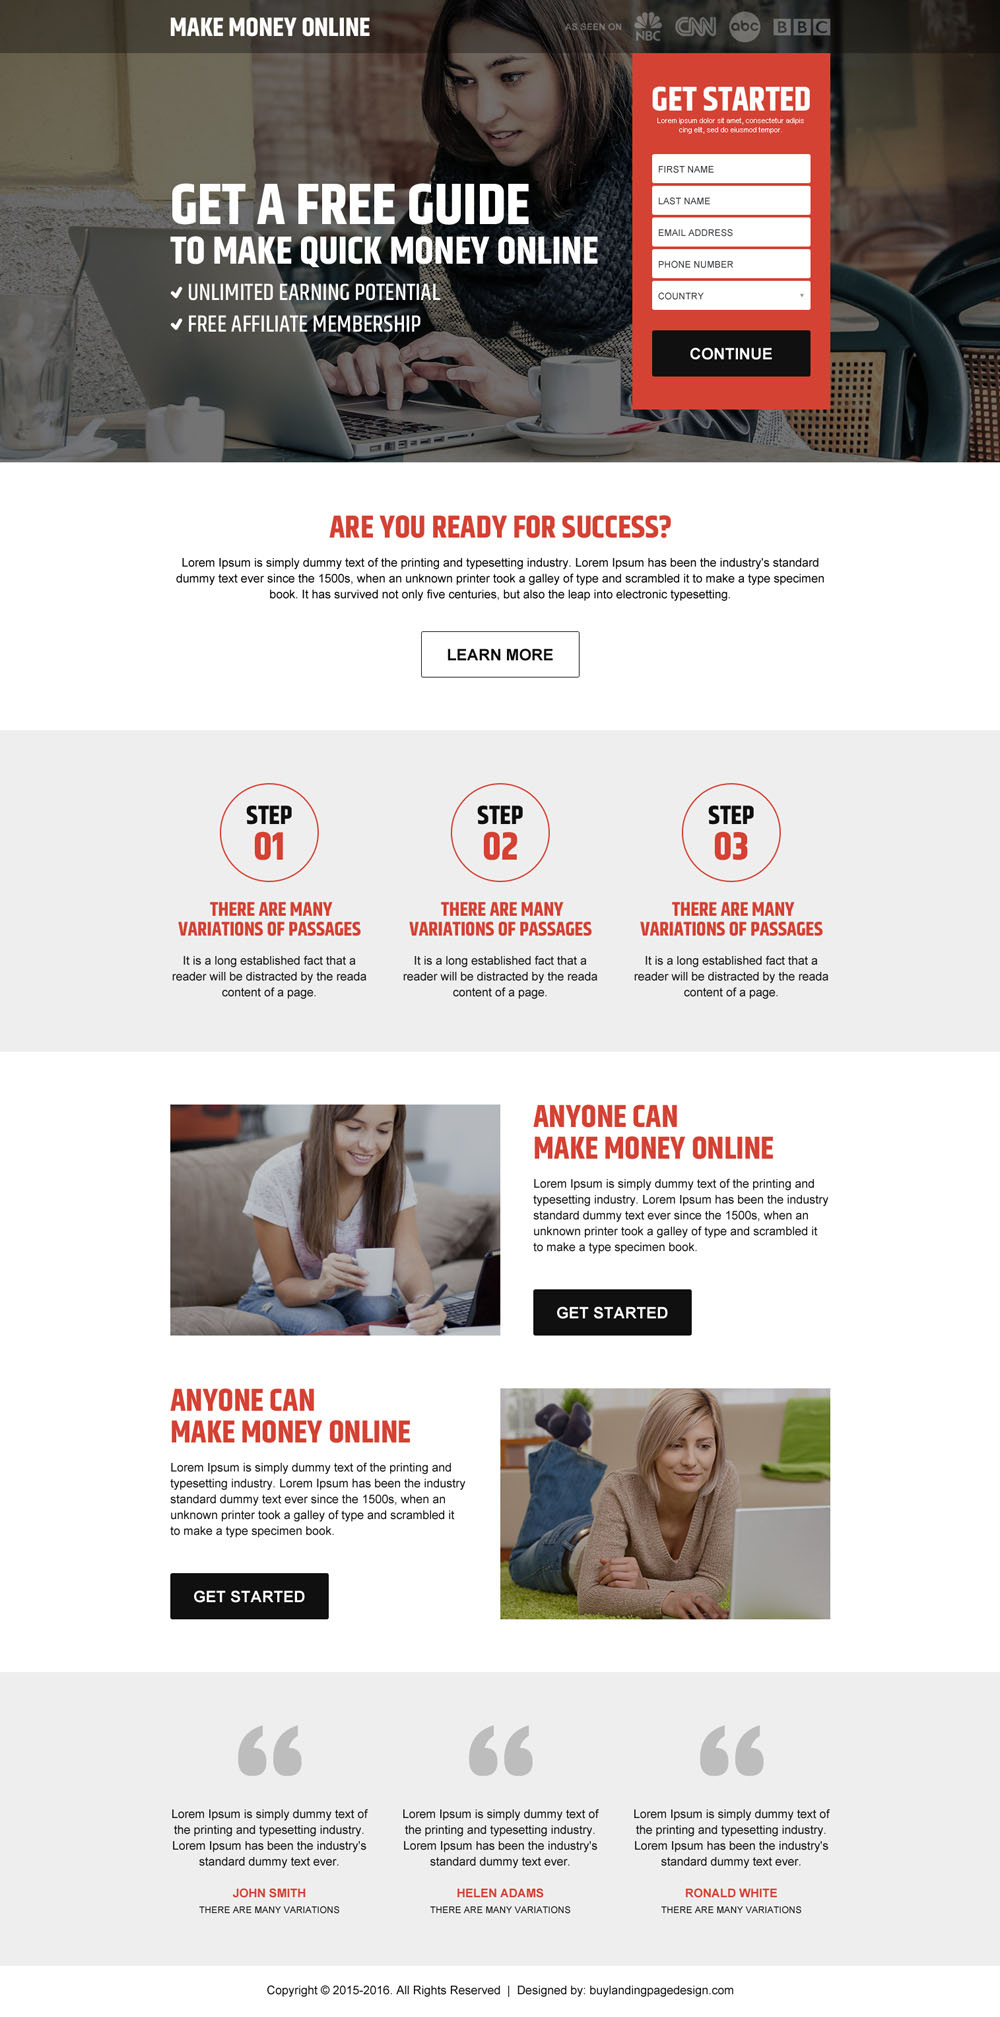 get-free-guide-to-make-money-online-from-home-lead-capture-landing-page-design-023